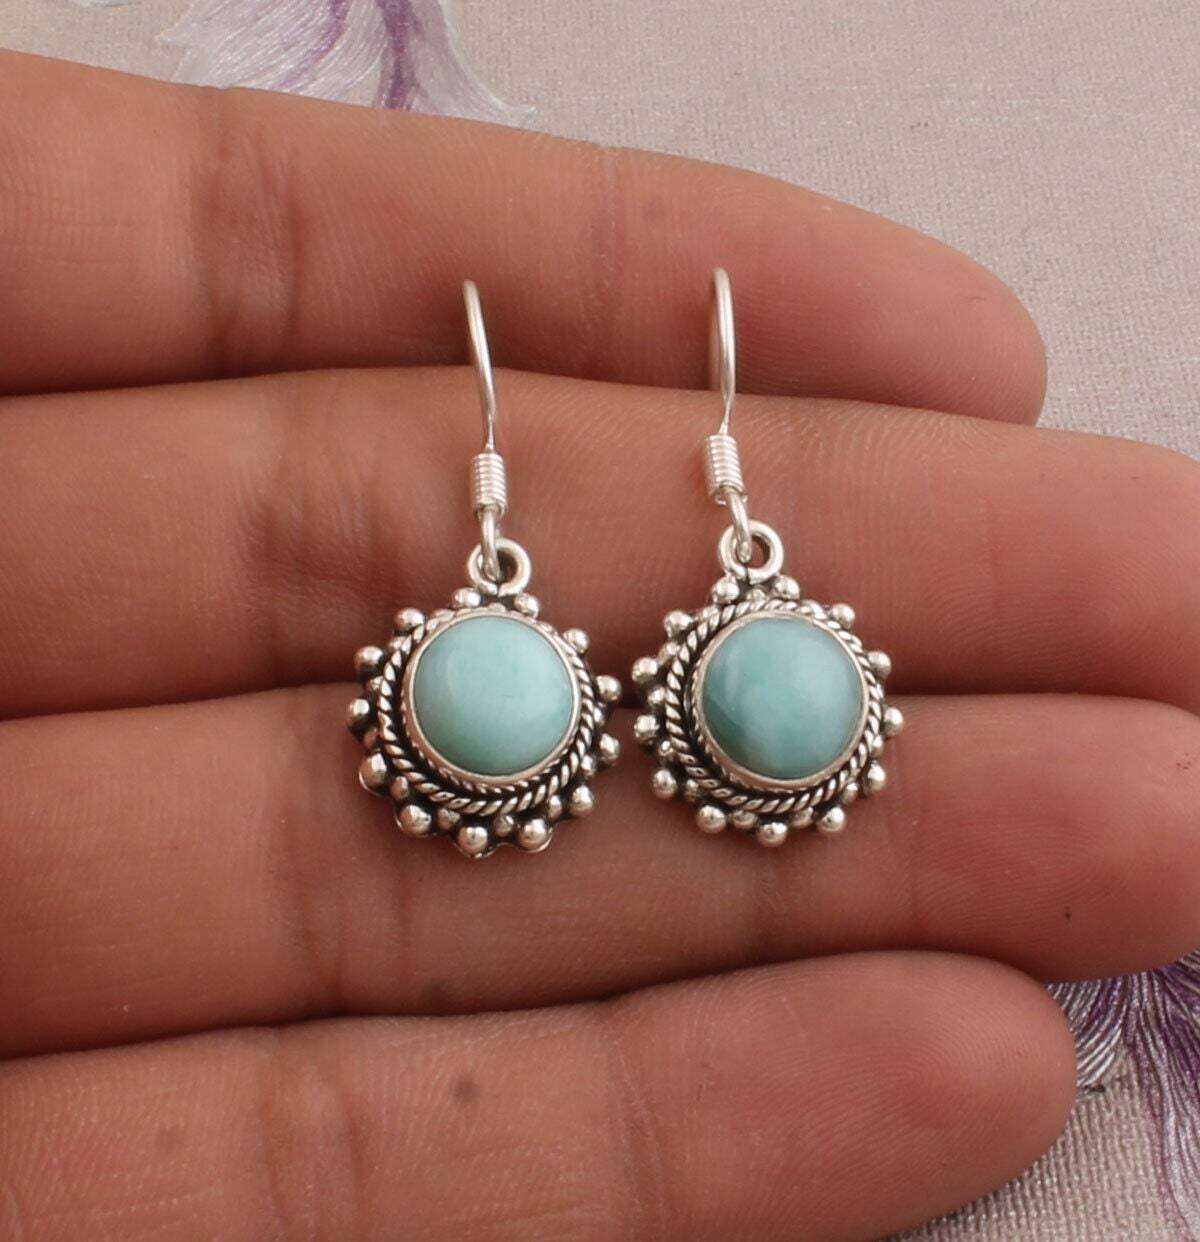 Natural Larimar Gemstone Earring,Top Quality Cabochon Opaque Earring 925,Antique Silver Earring,Sterling Silver Earring,Valentine's Day Gift